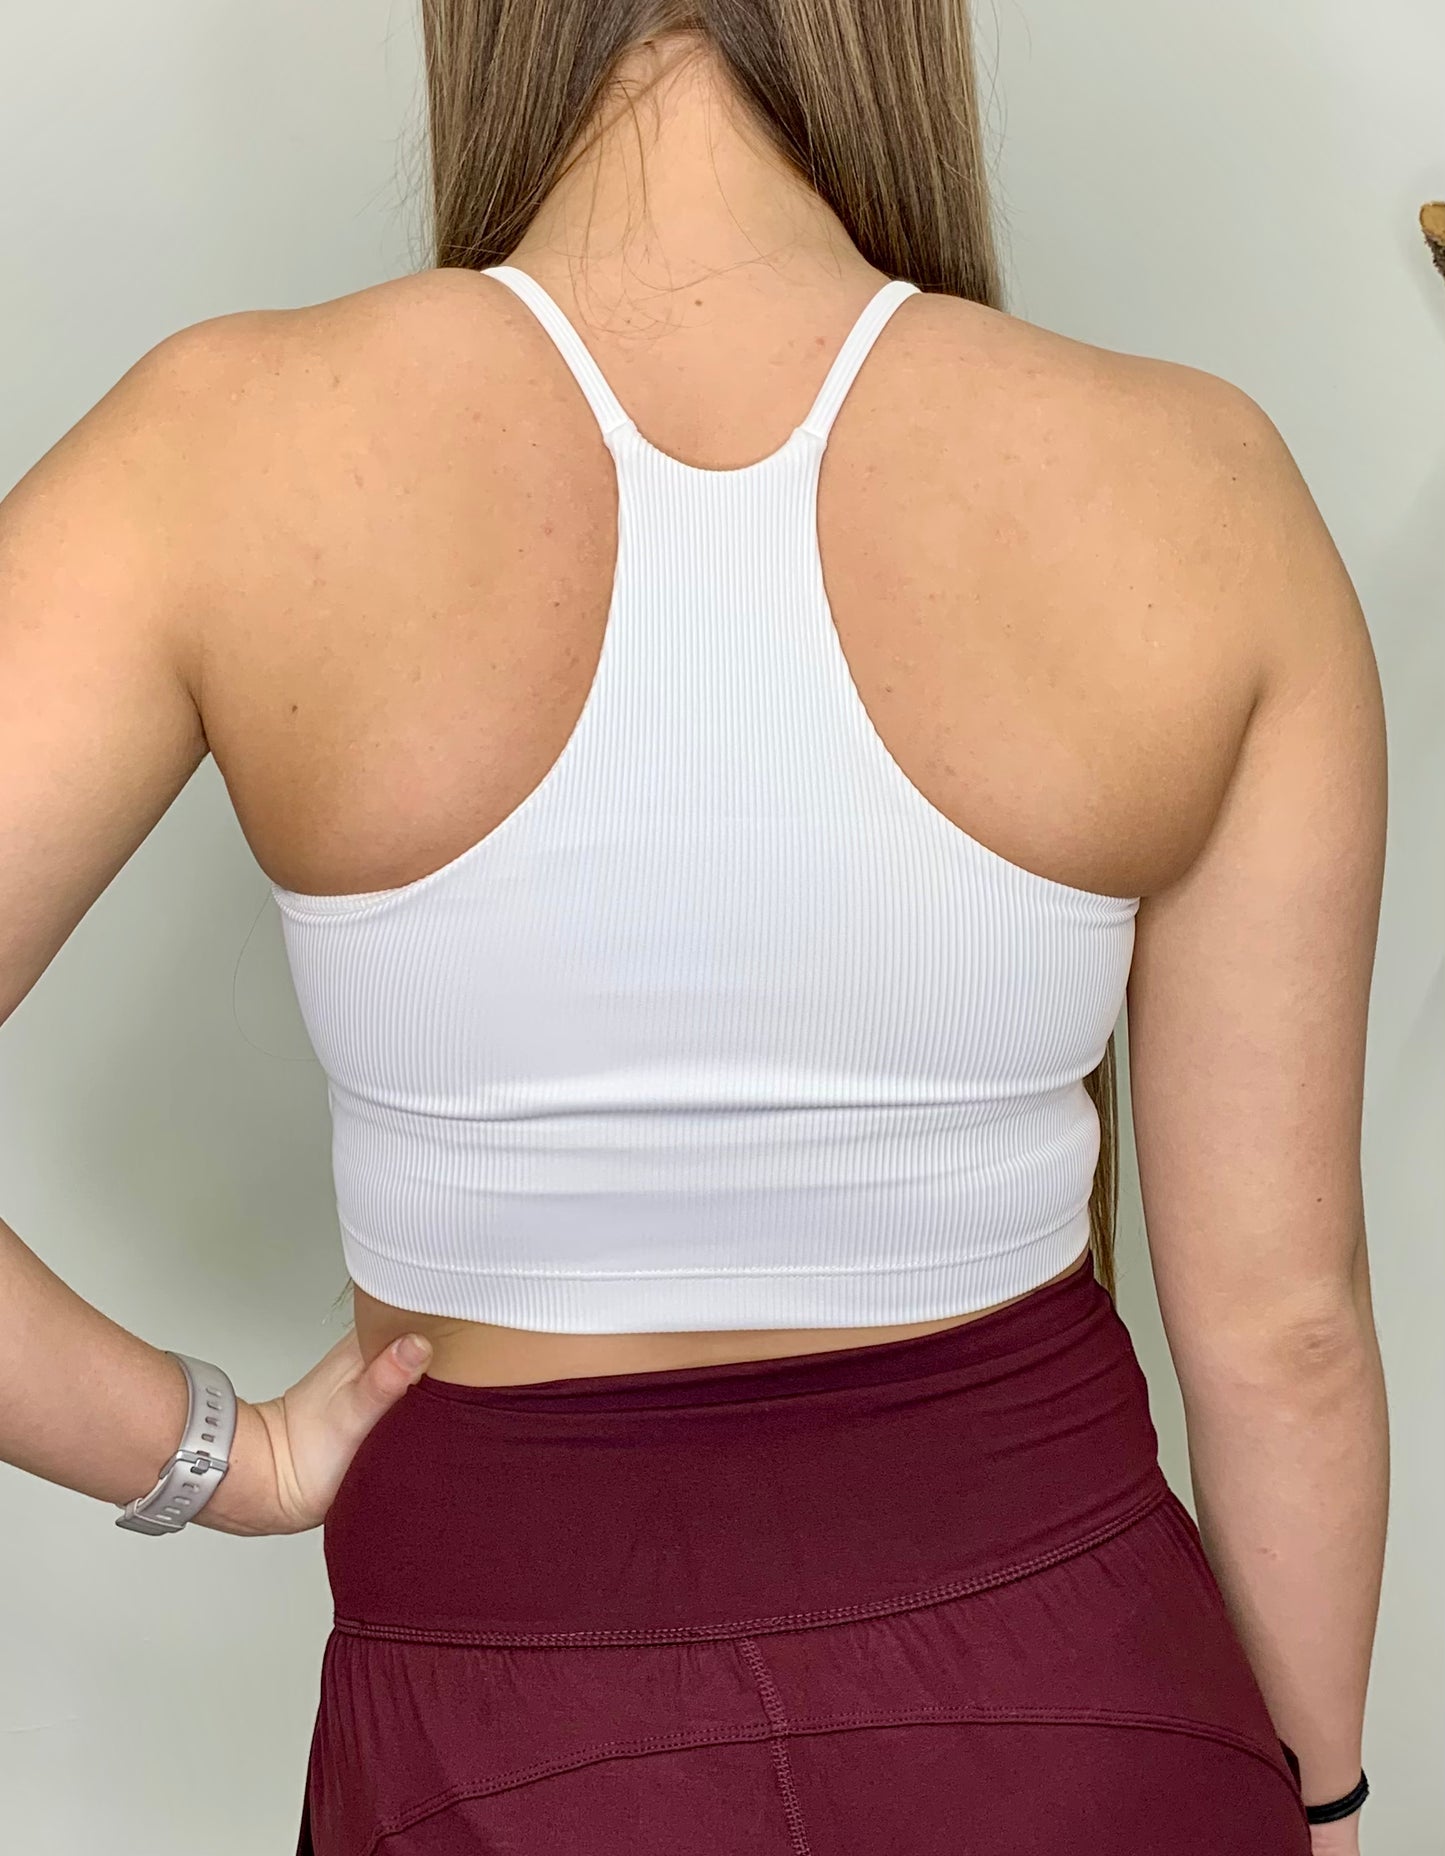 The Ribbed Crop Top